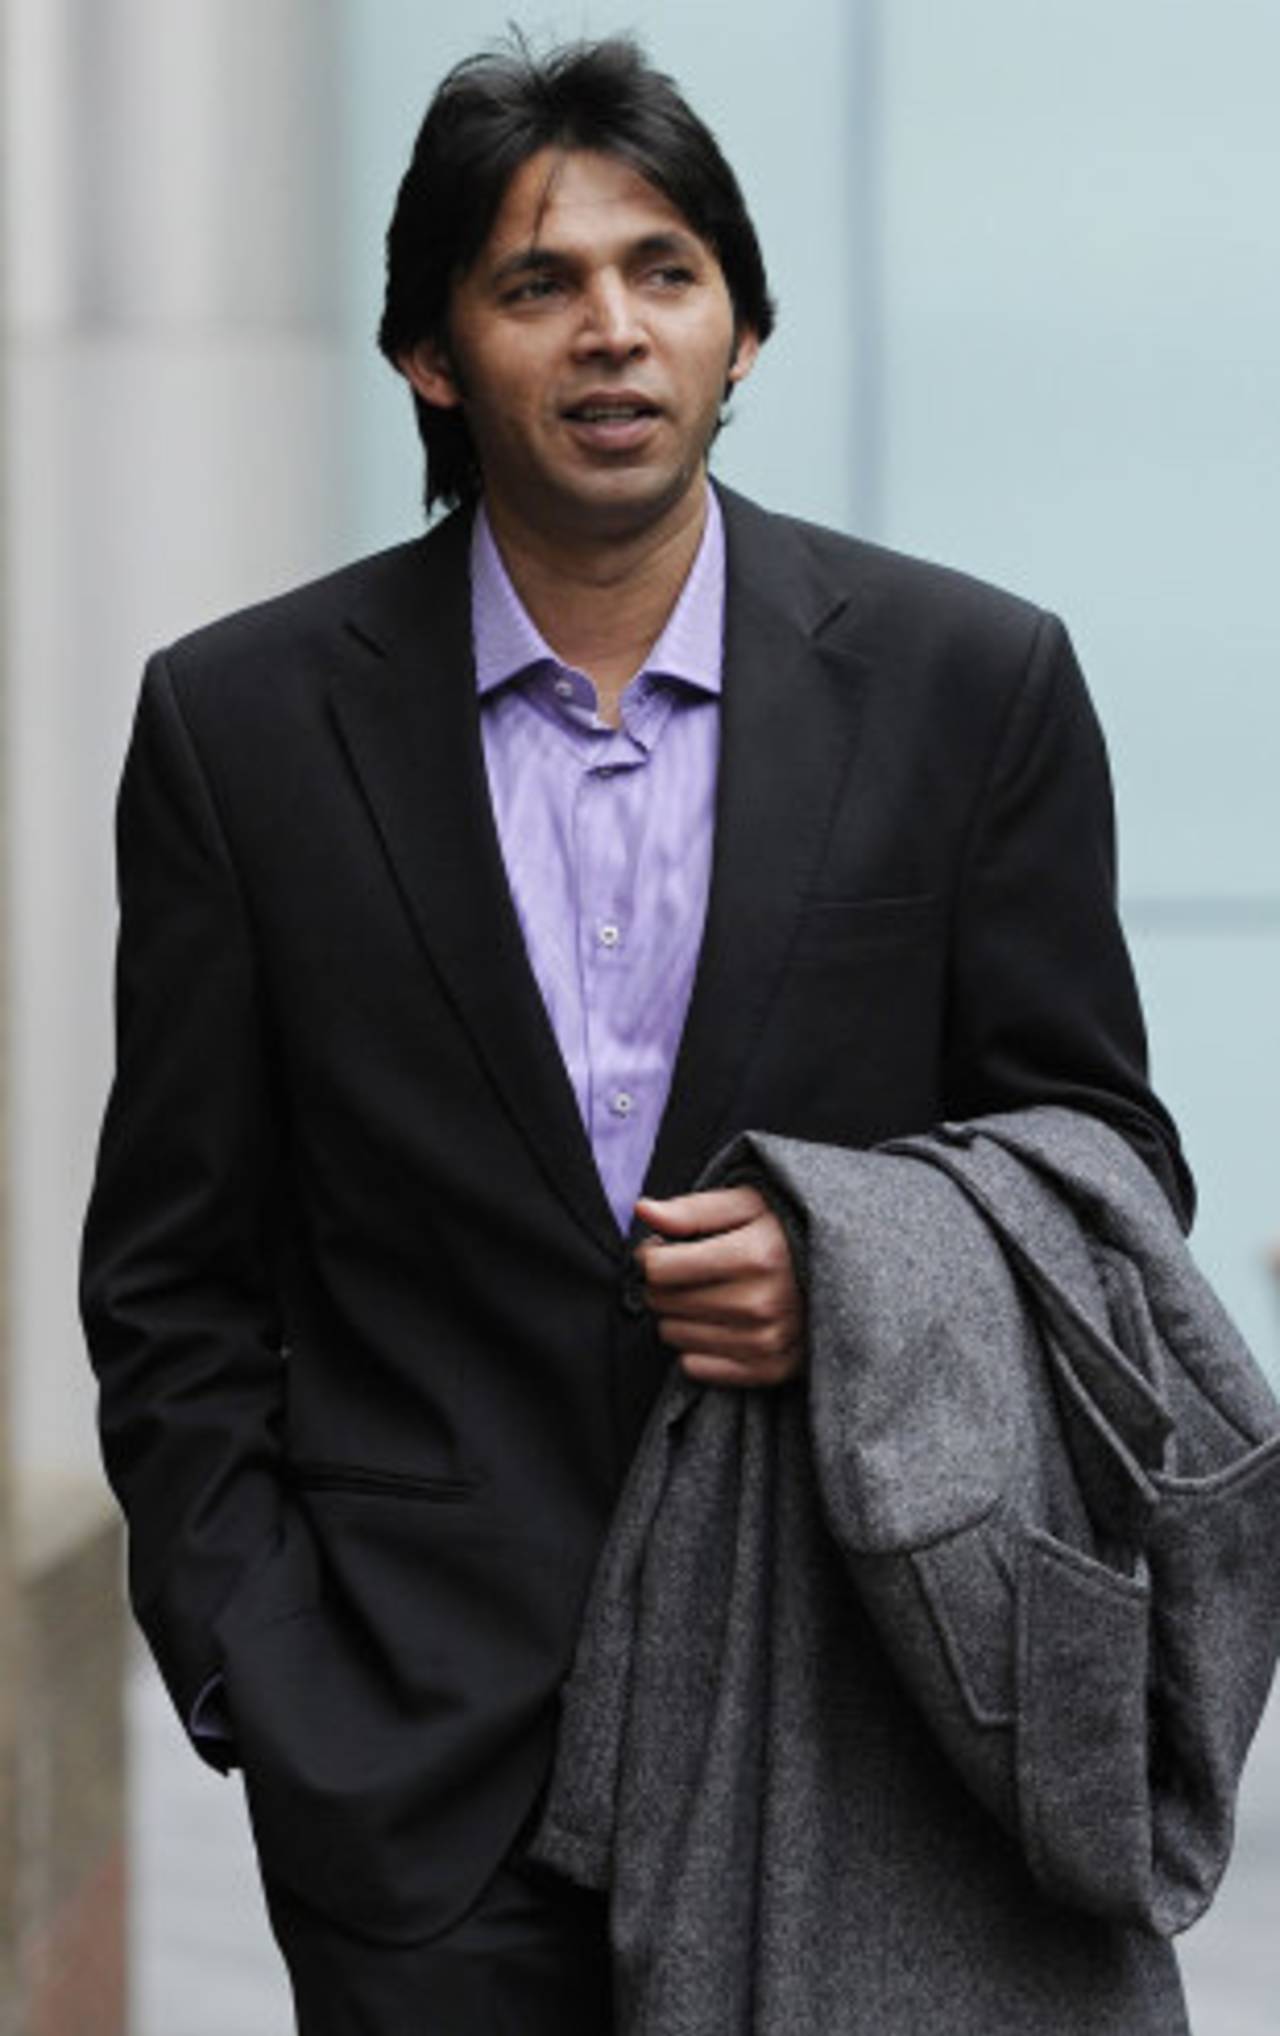 Mohammad Asif outside the Southwark Crown Court, London, October 31, 2011